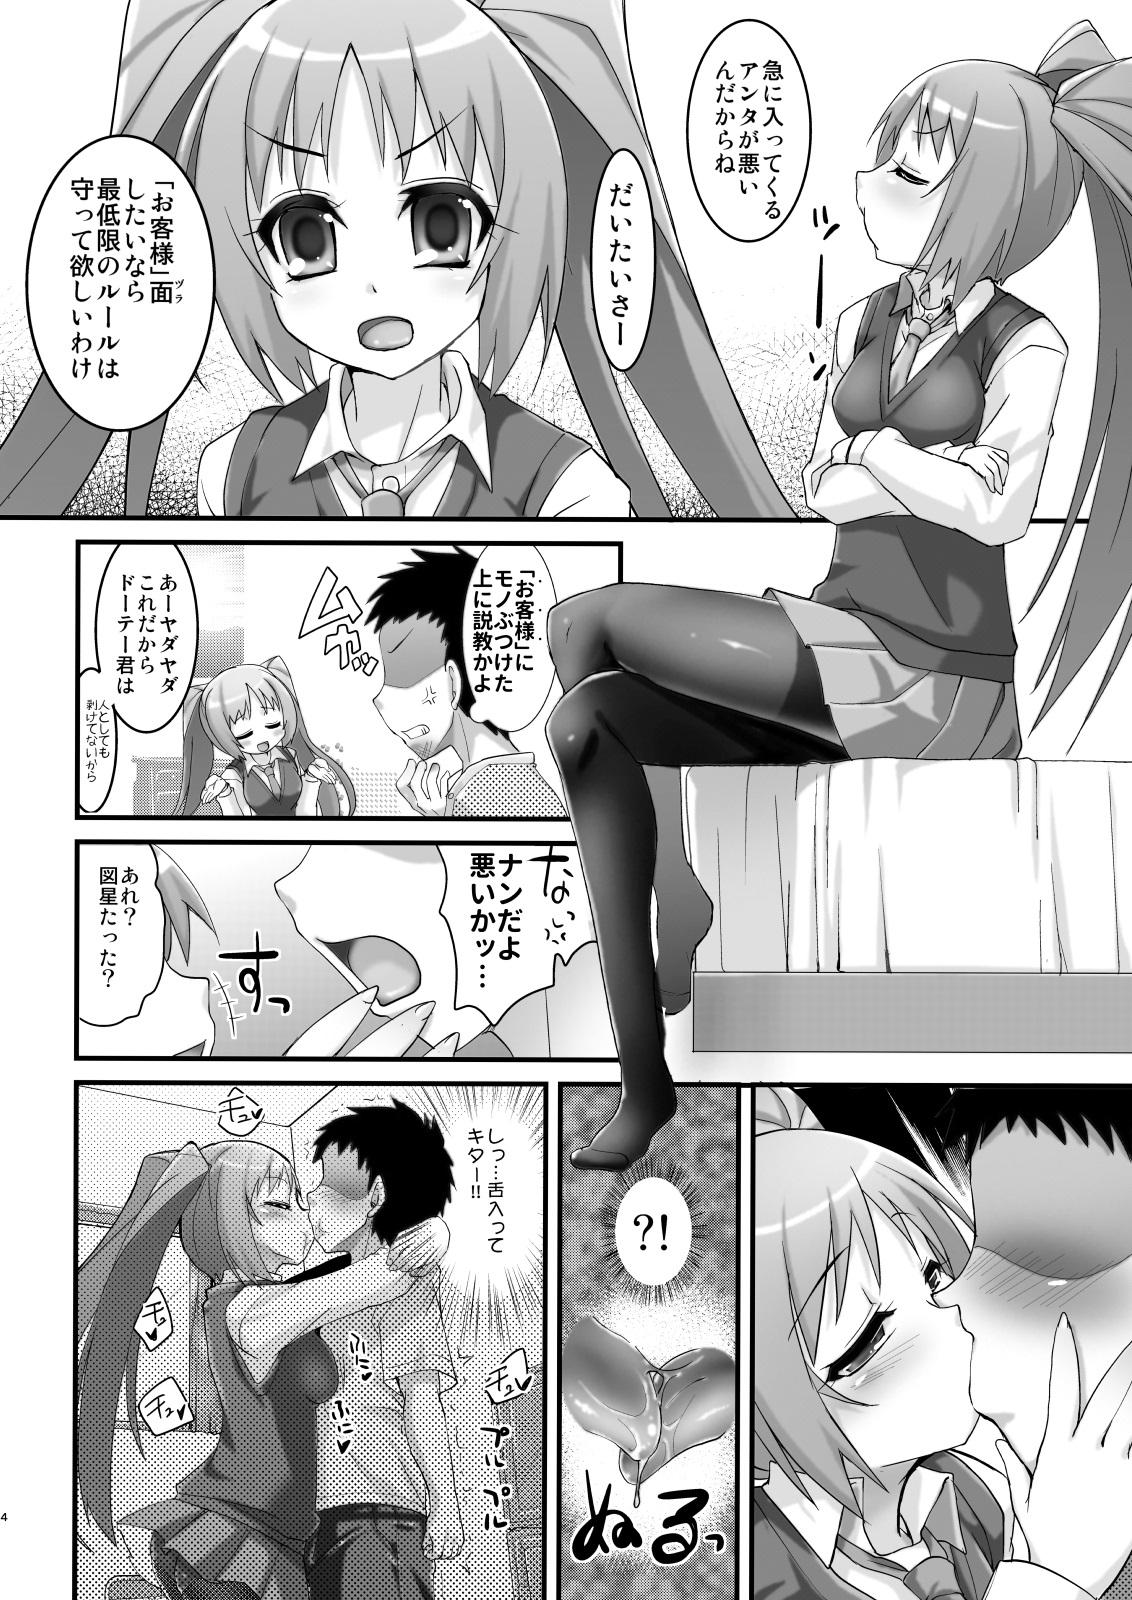 Juggs Tsundere Tights to Twintails - Original Deep - Page 4